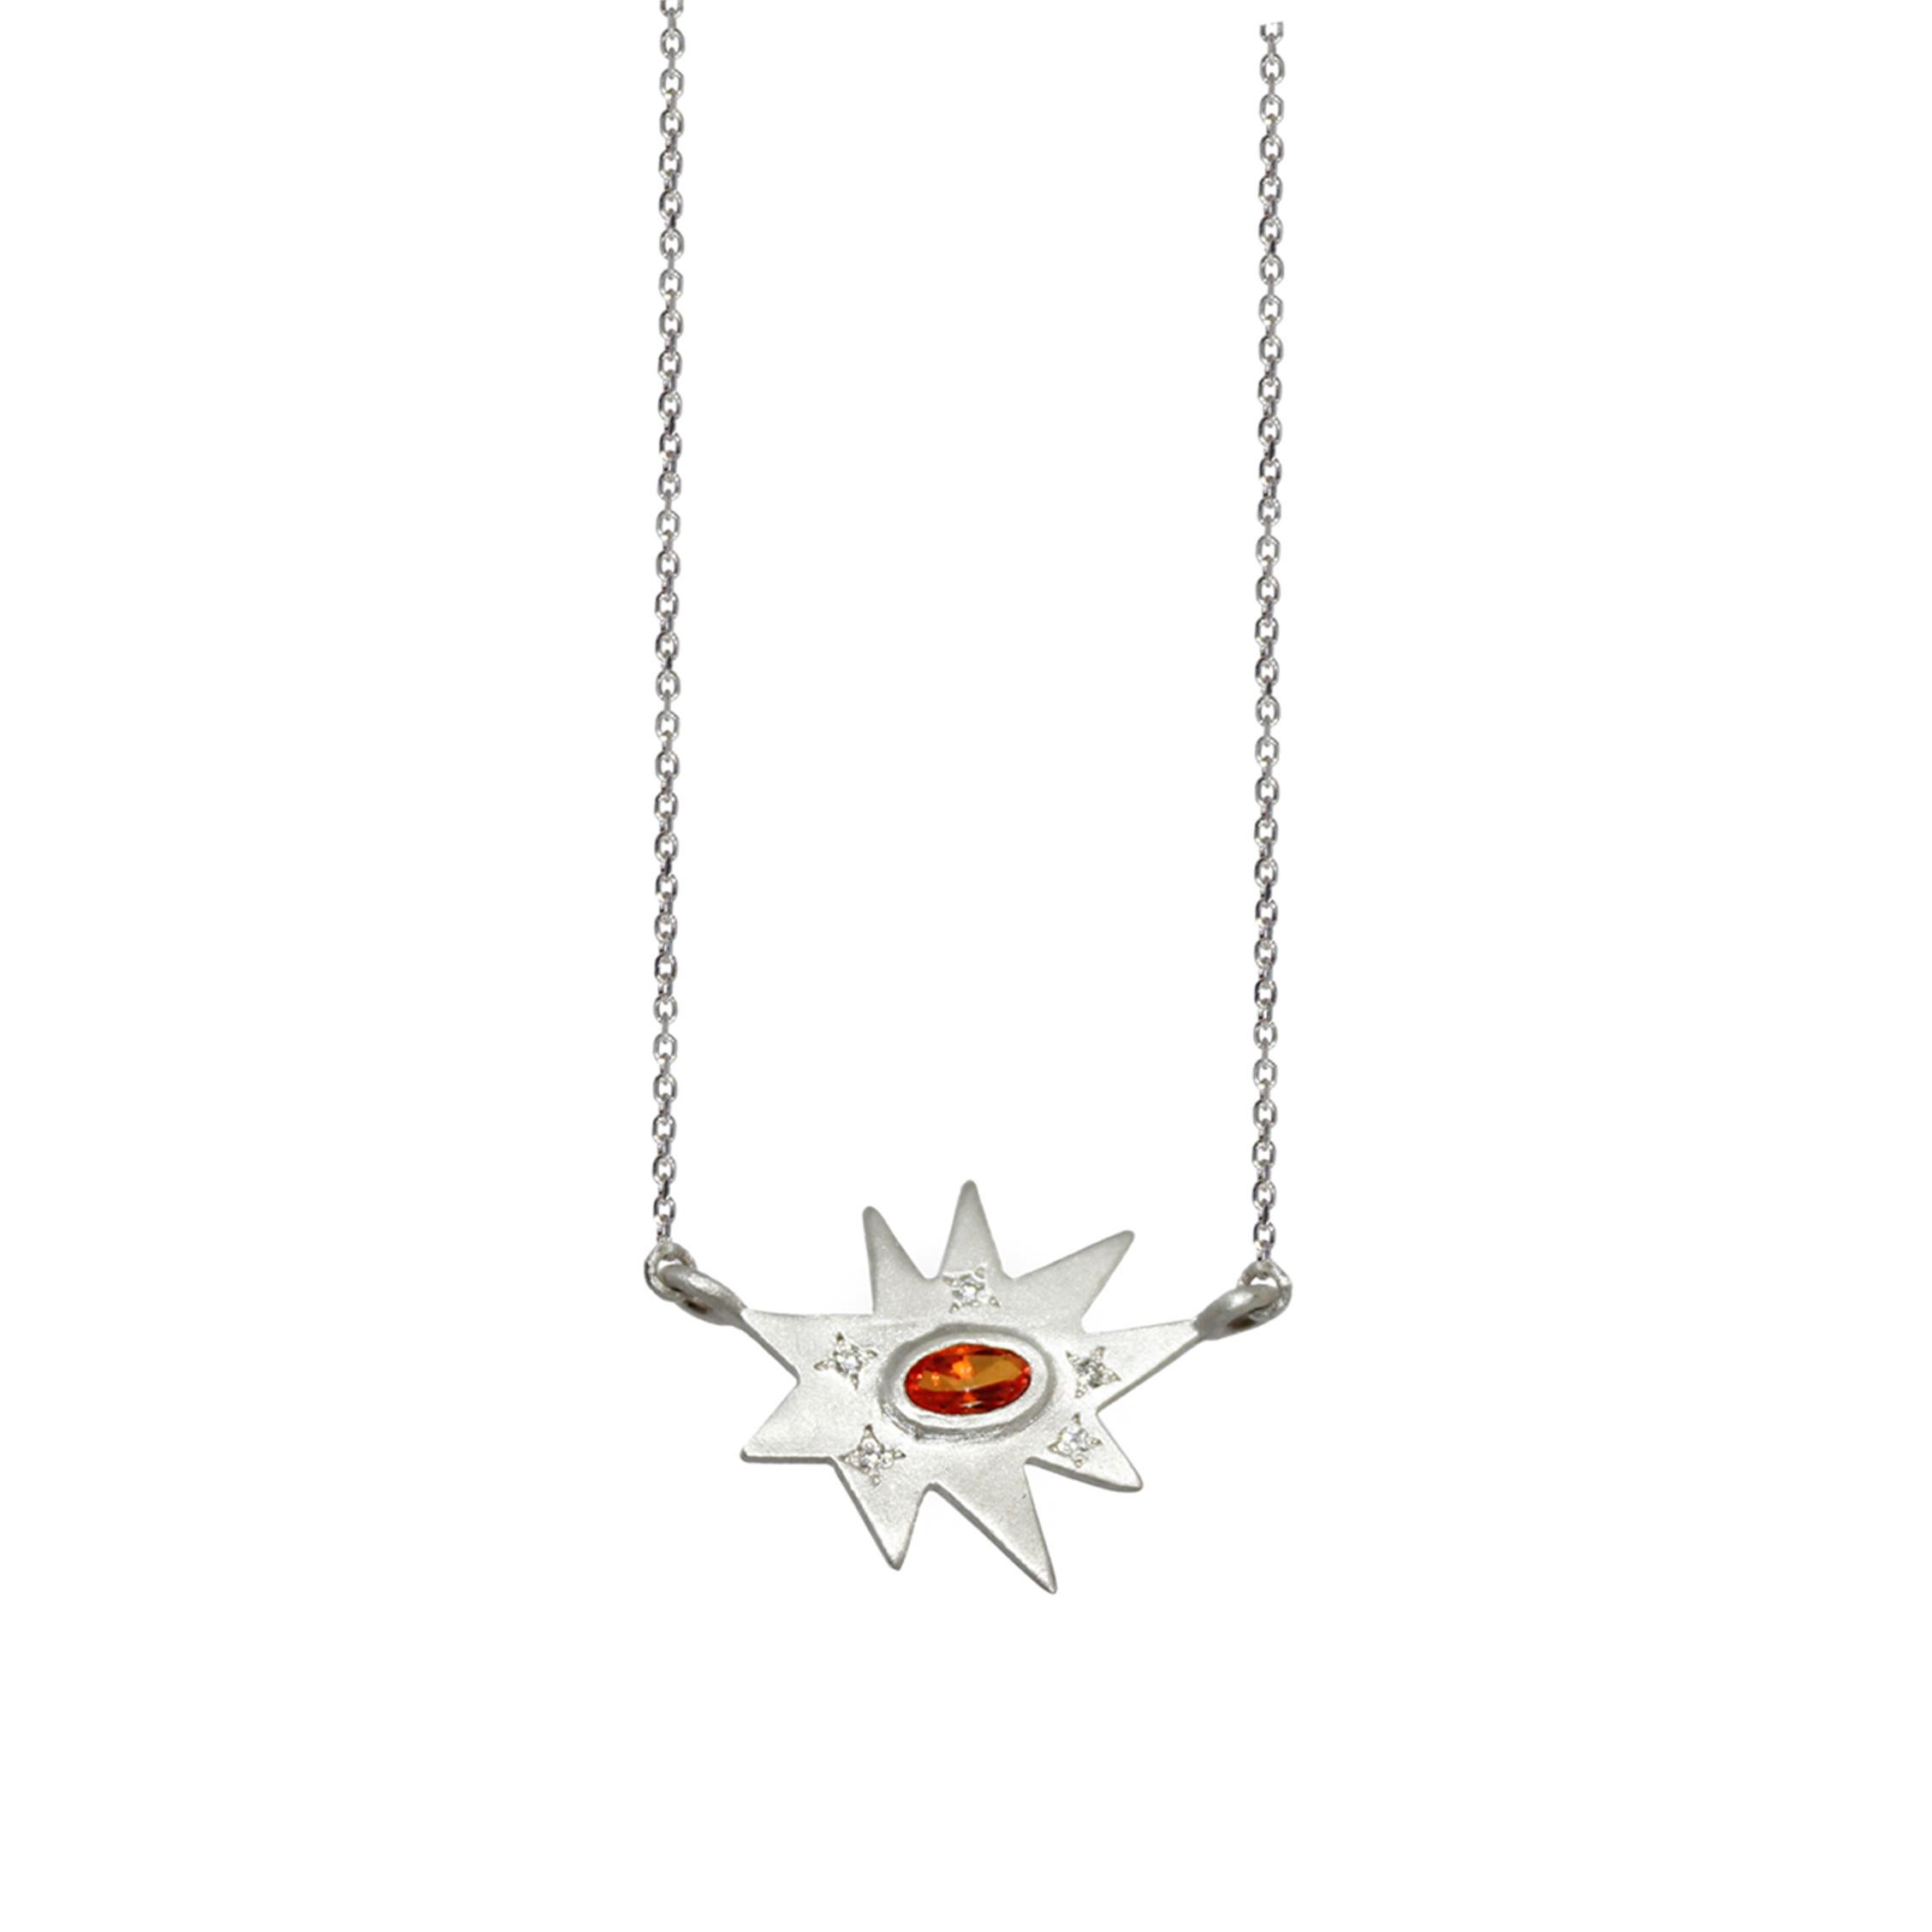 Emily Kuvin Silver Star Necklace with Diamonds and Topaz